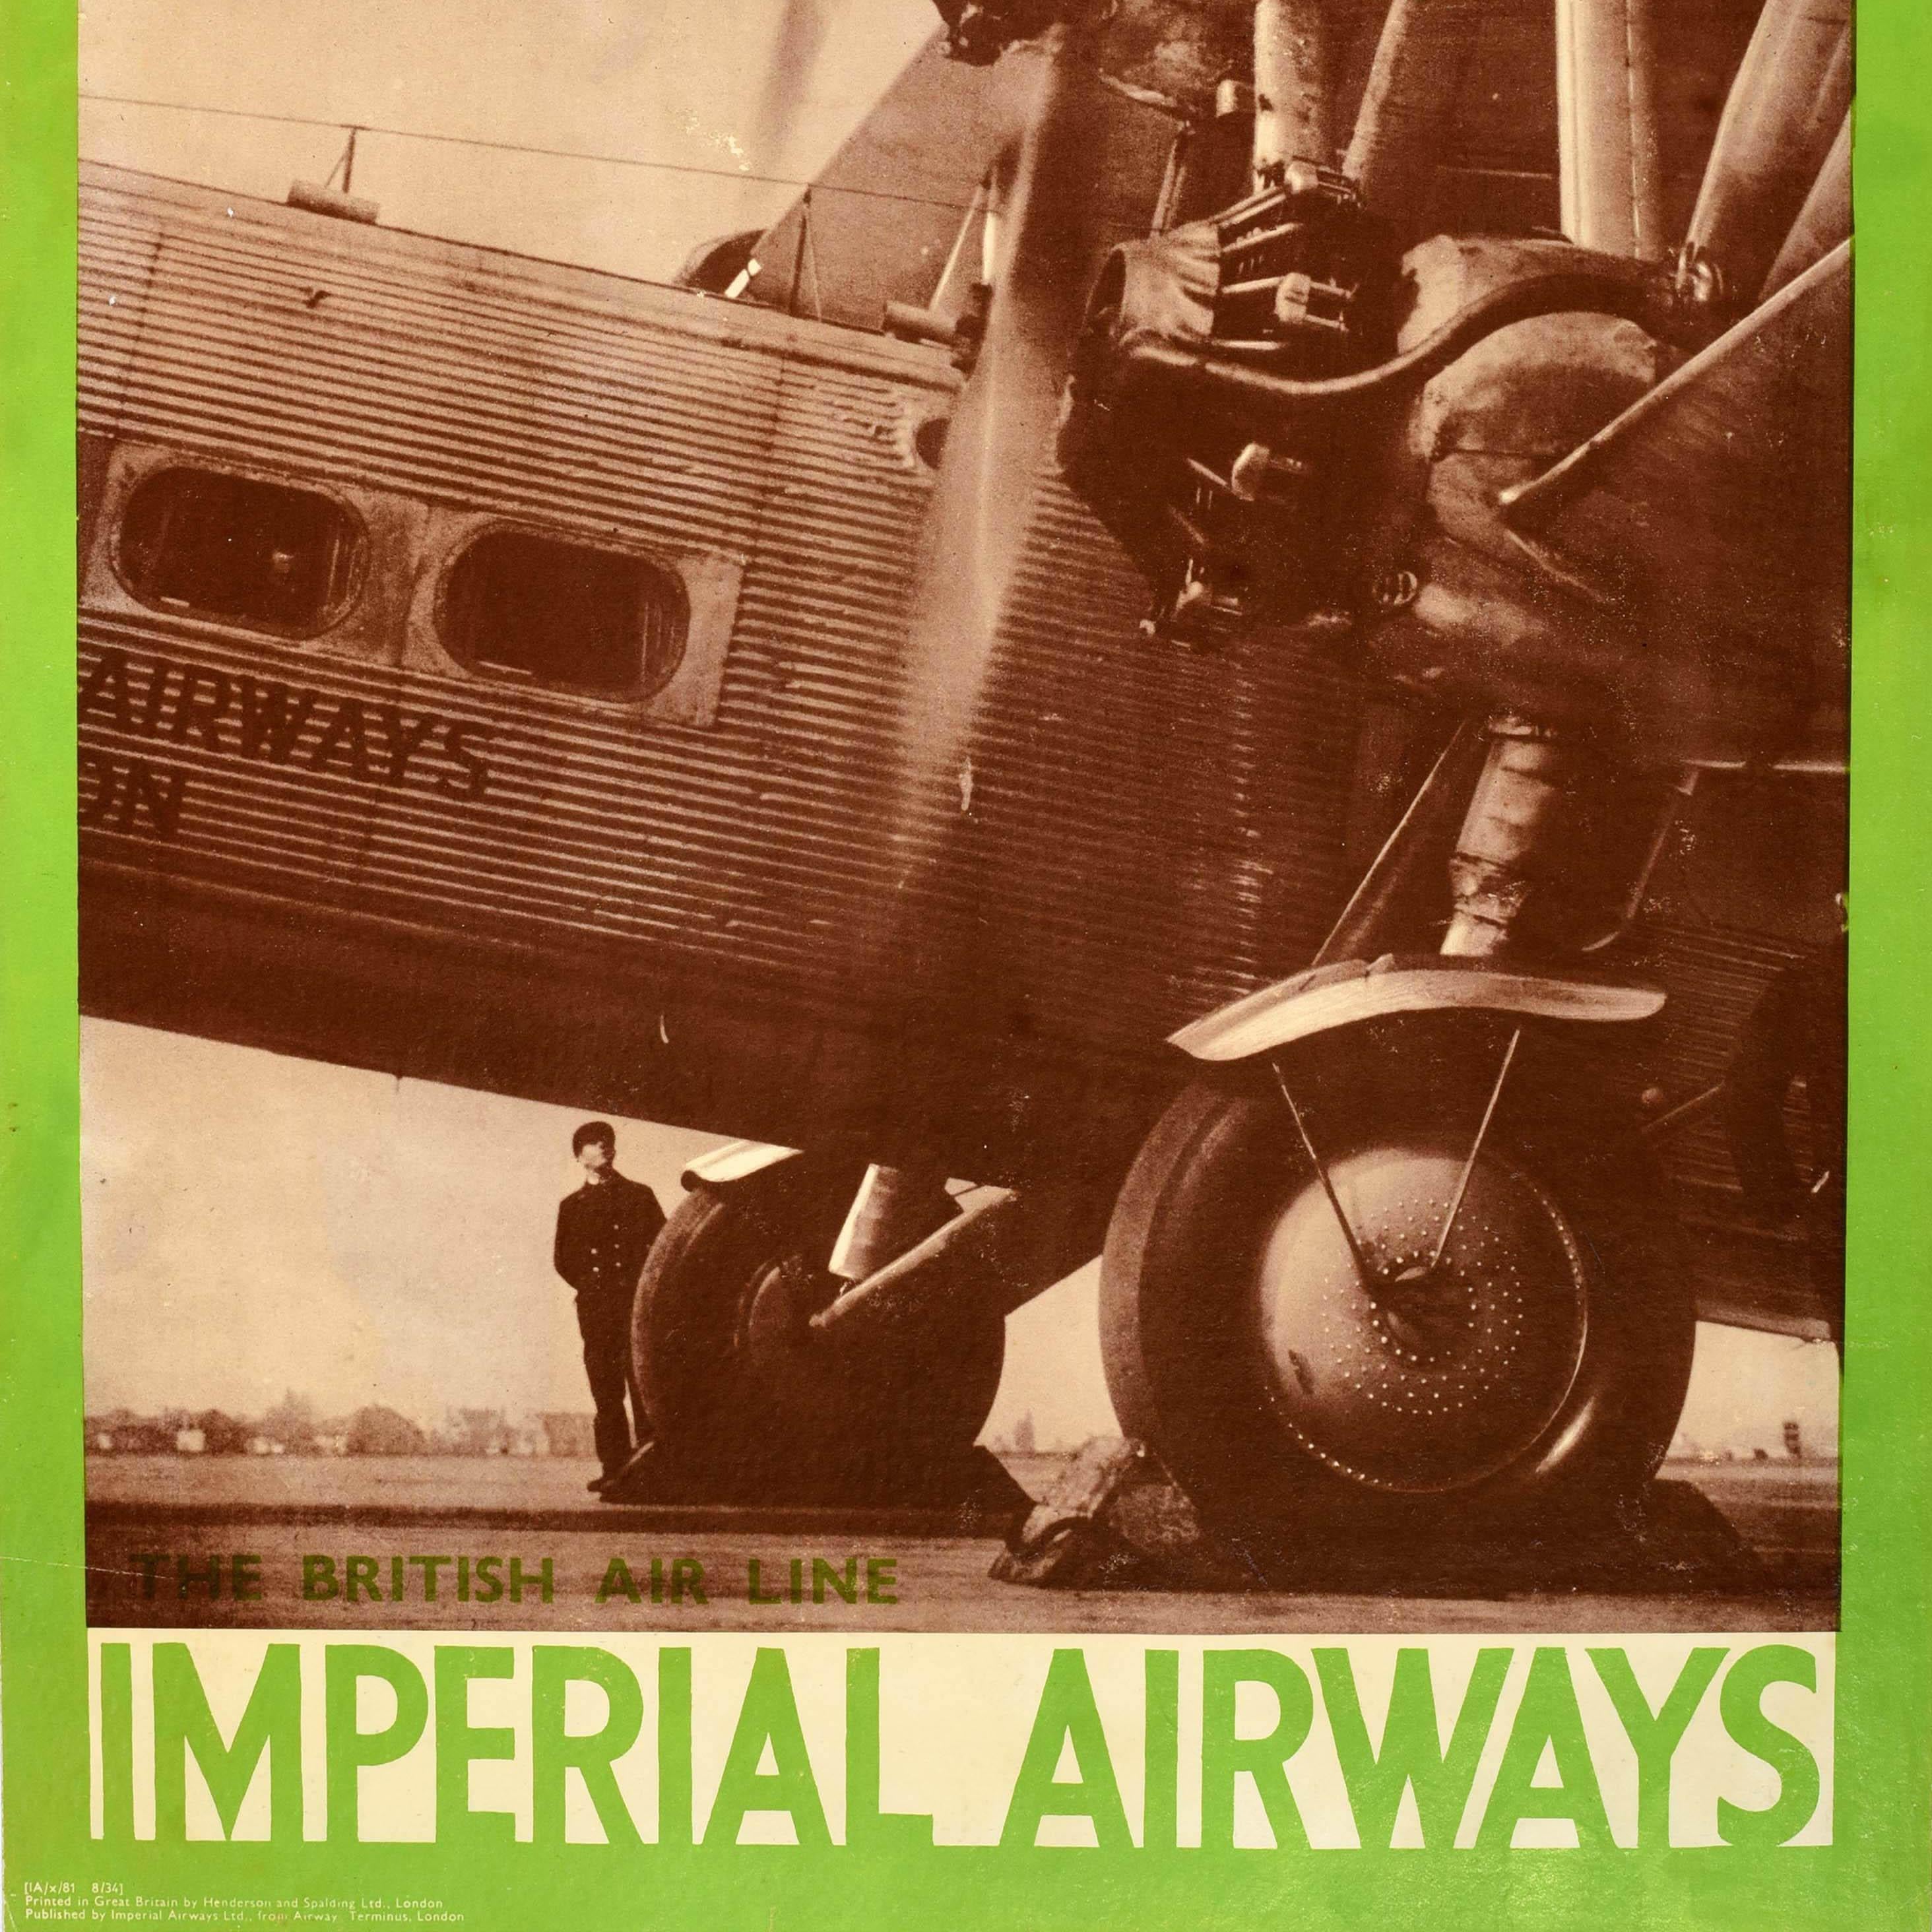 Original Vintage Travel Poster Imperial Airways British Airline Heracles Plane For Sale 1